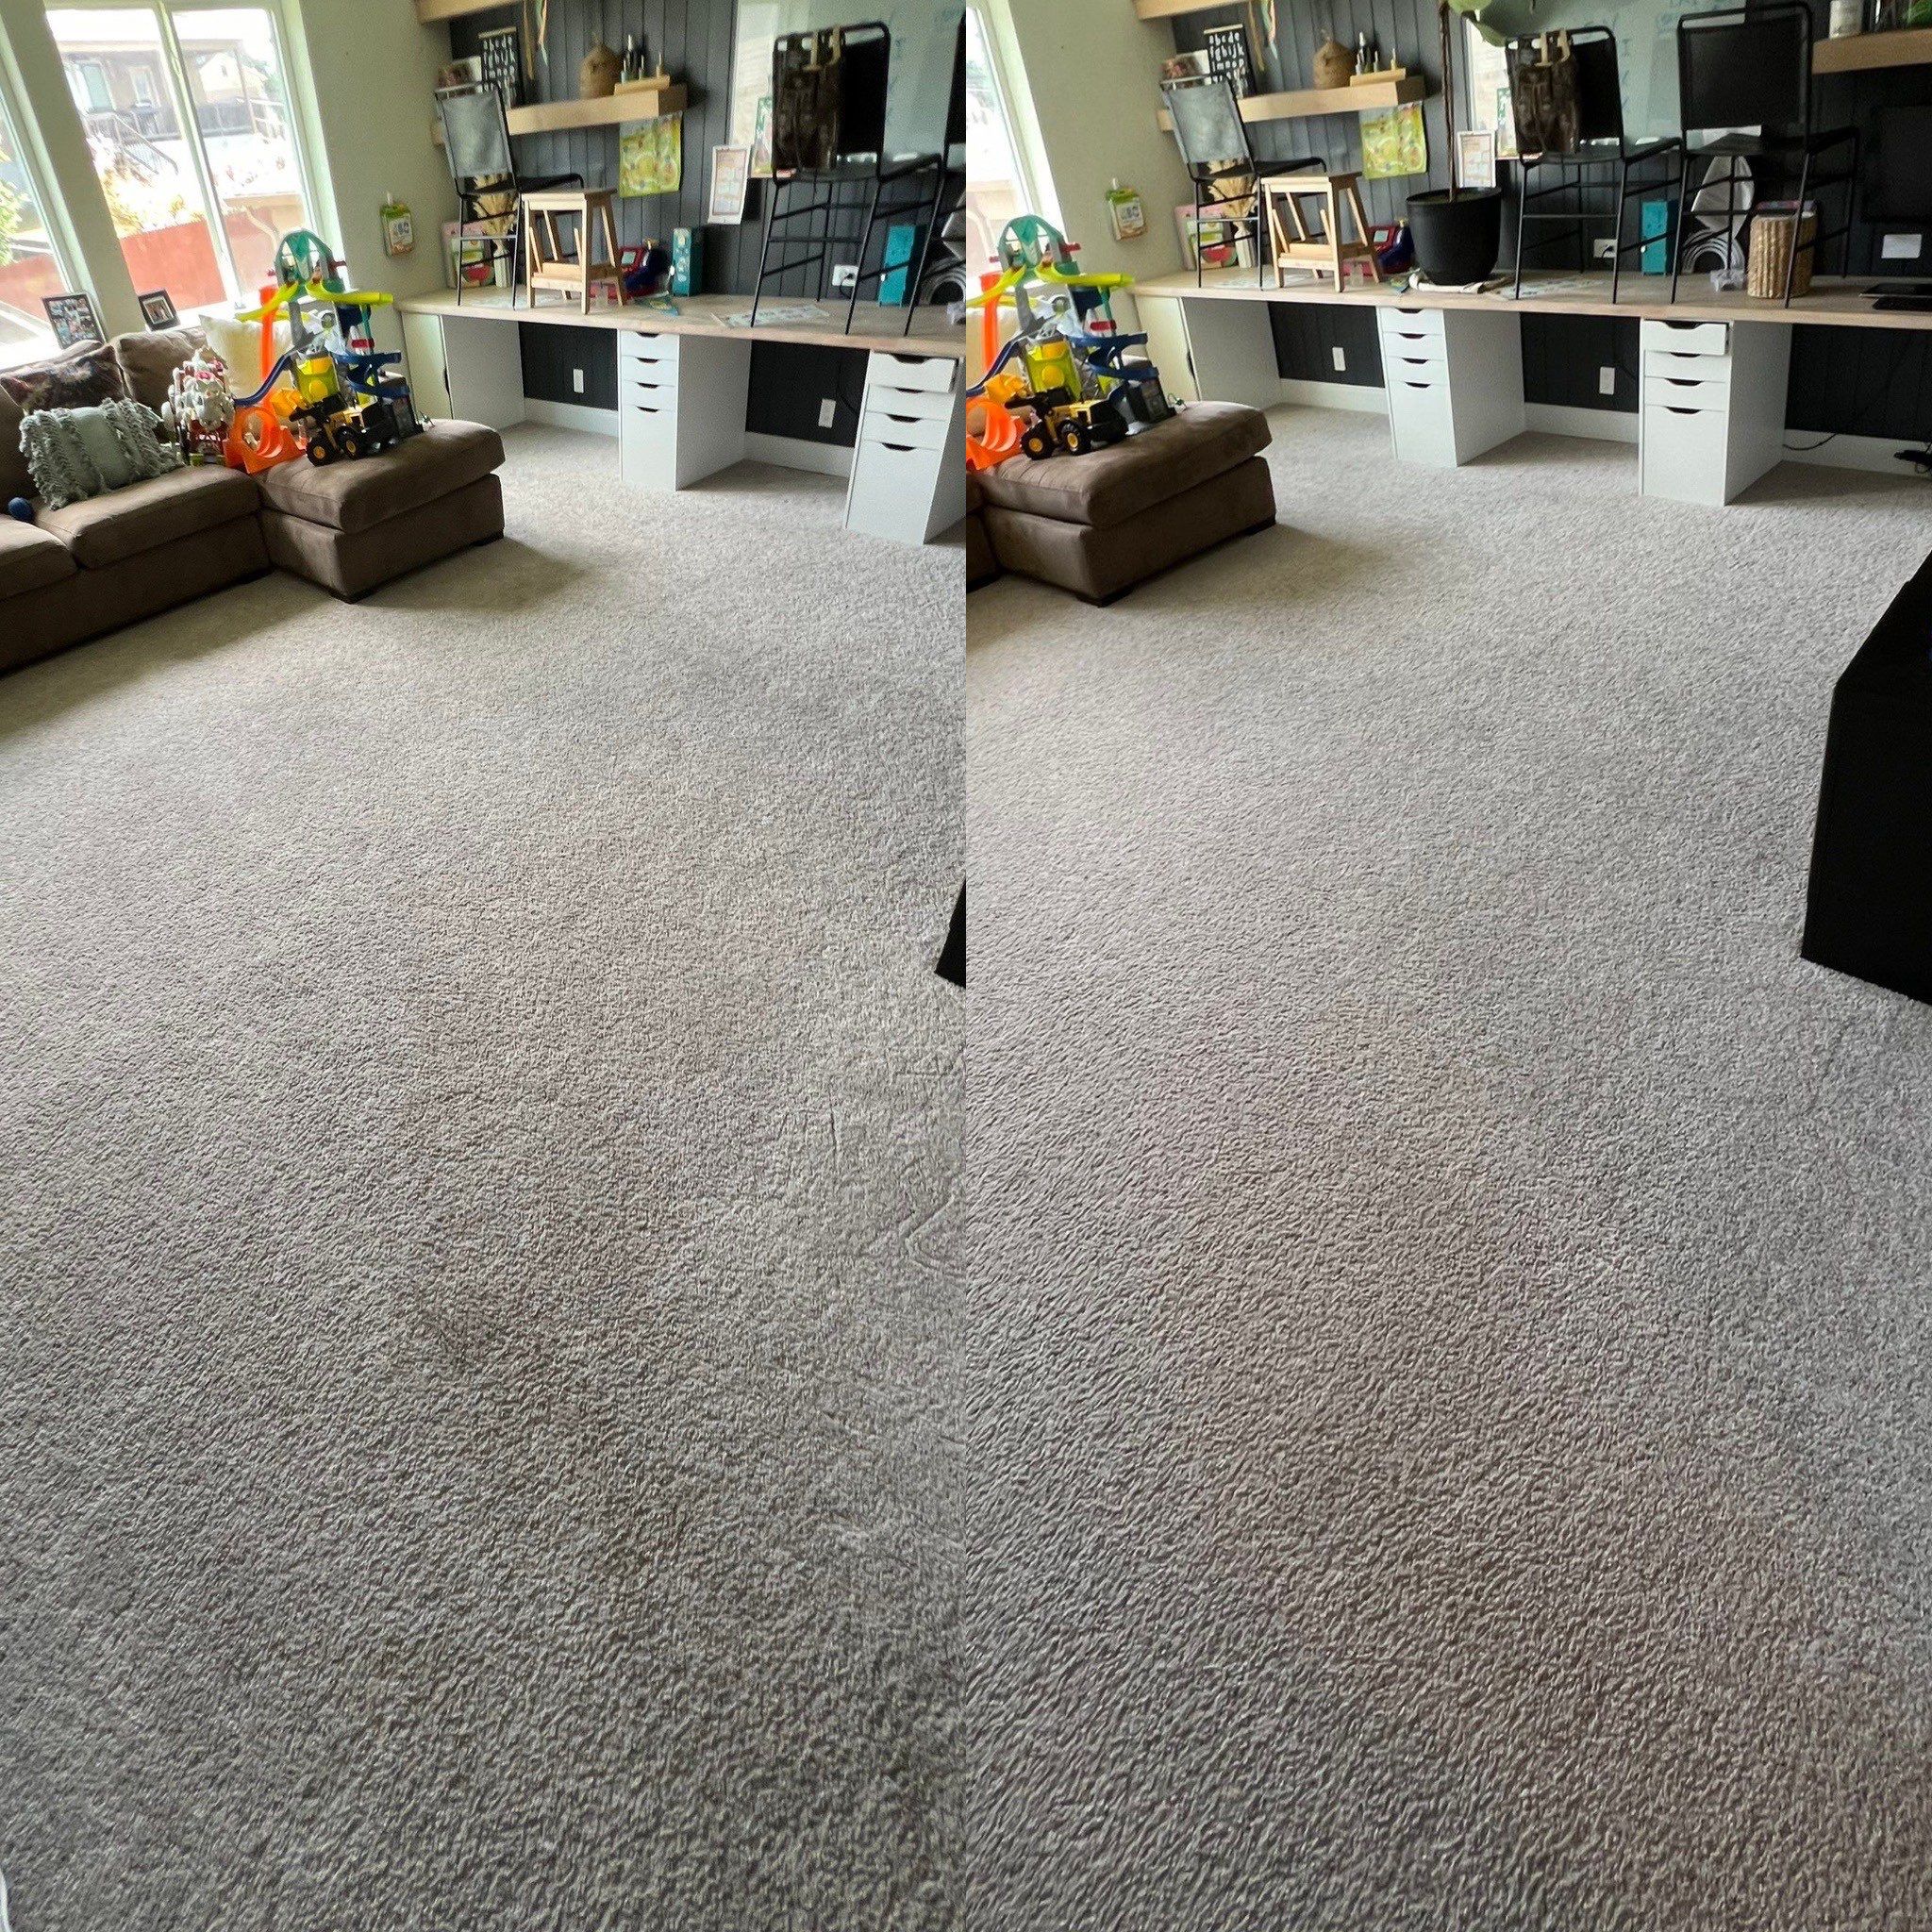 Hot Water Extraction Carpet Cleaners Project in San Antonio  TX 78245